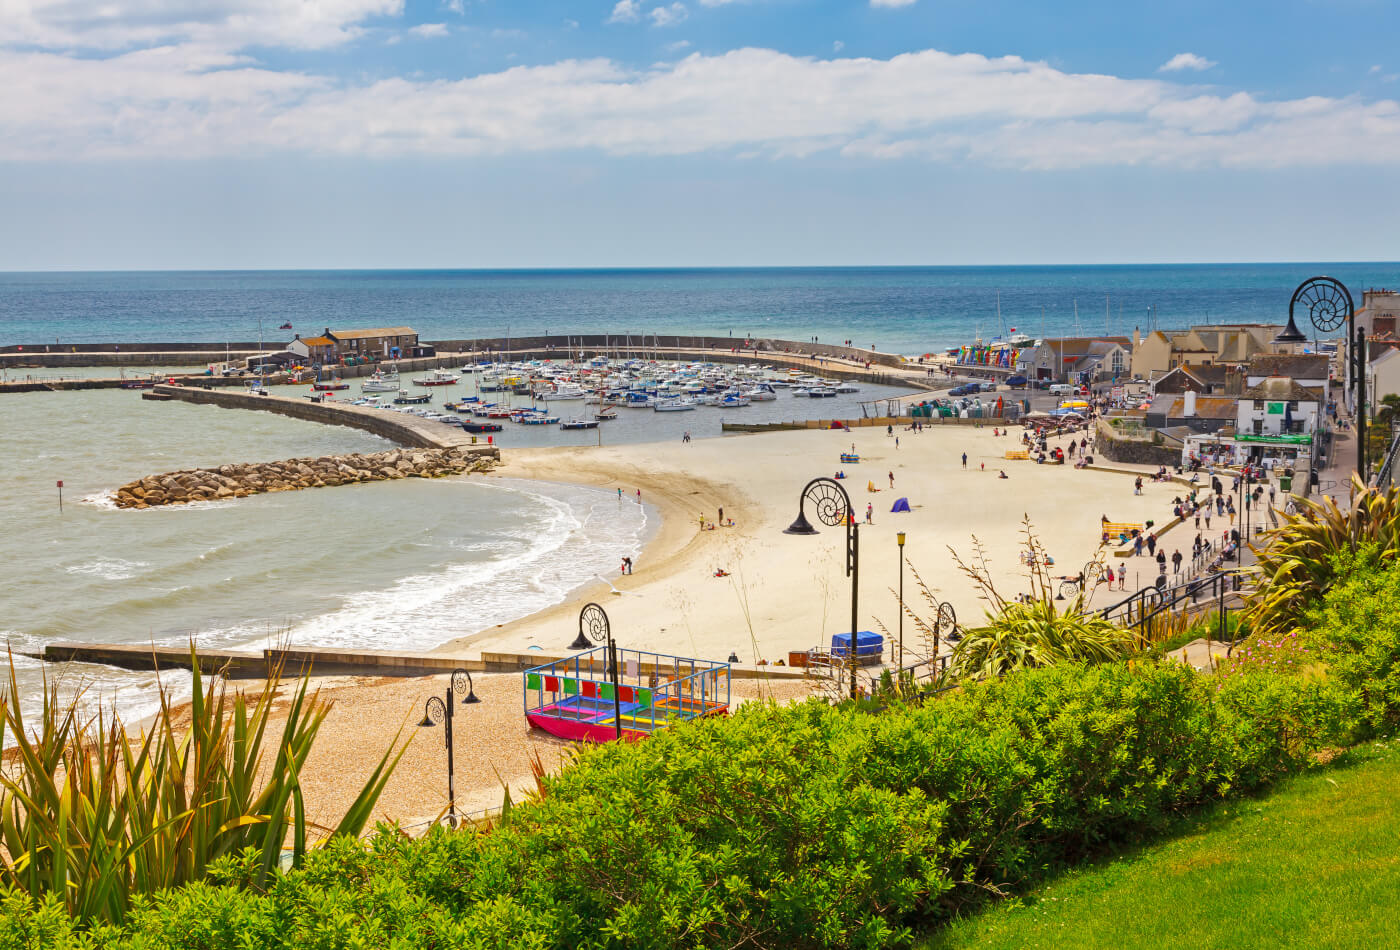 lyme regis, a beach holiday in the uk